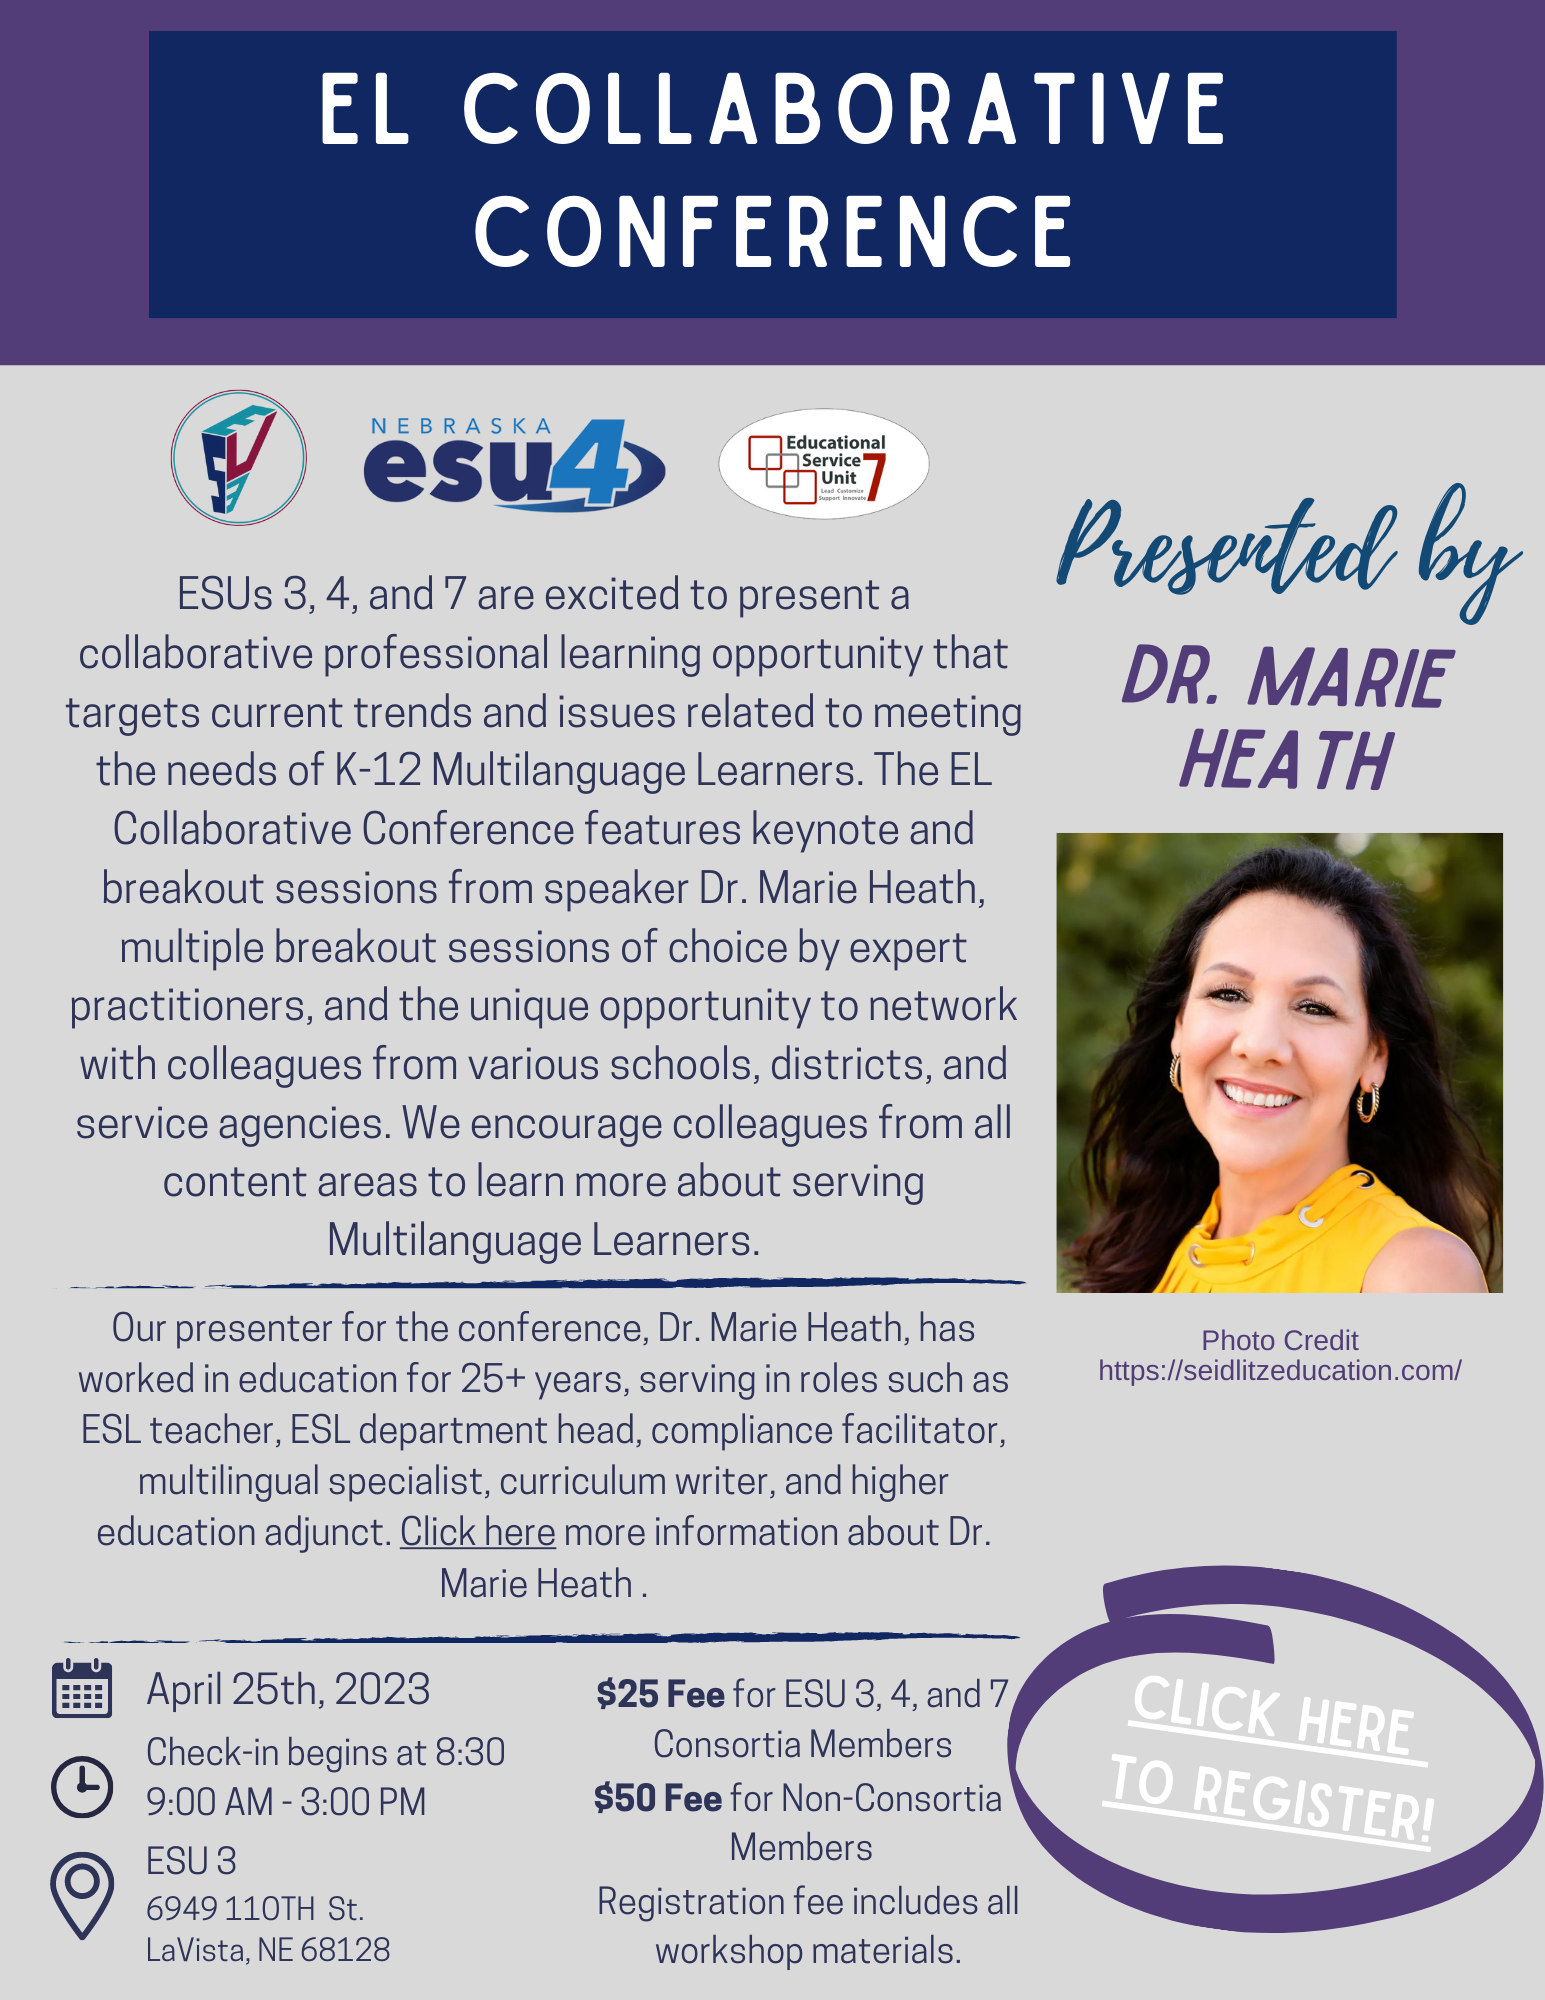 Click here to register for the EL Collaborative Conference.